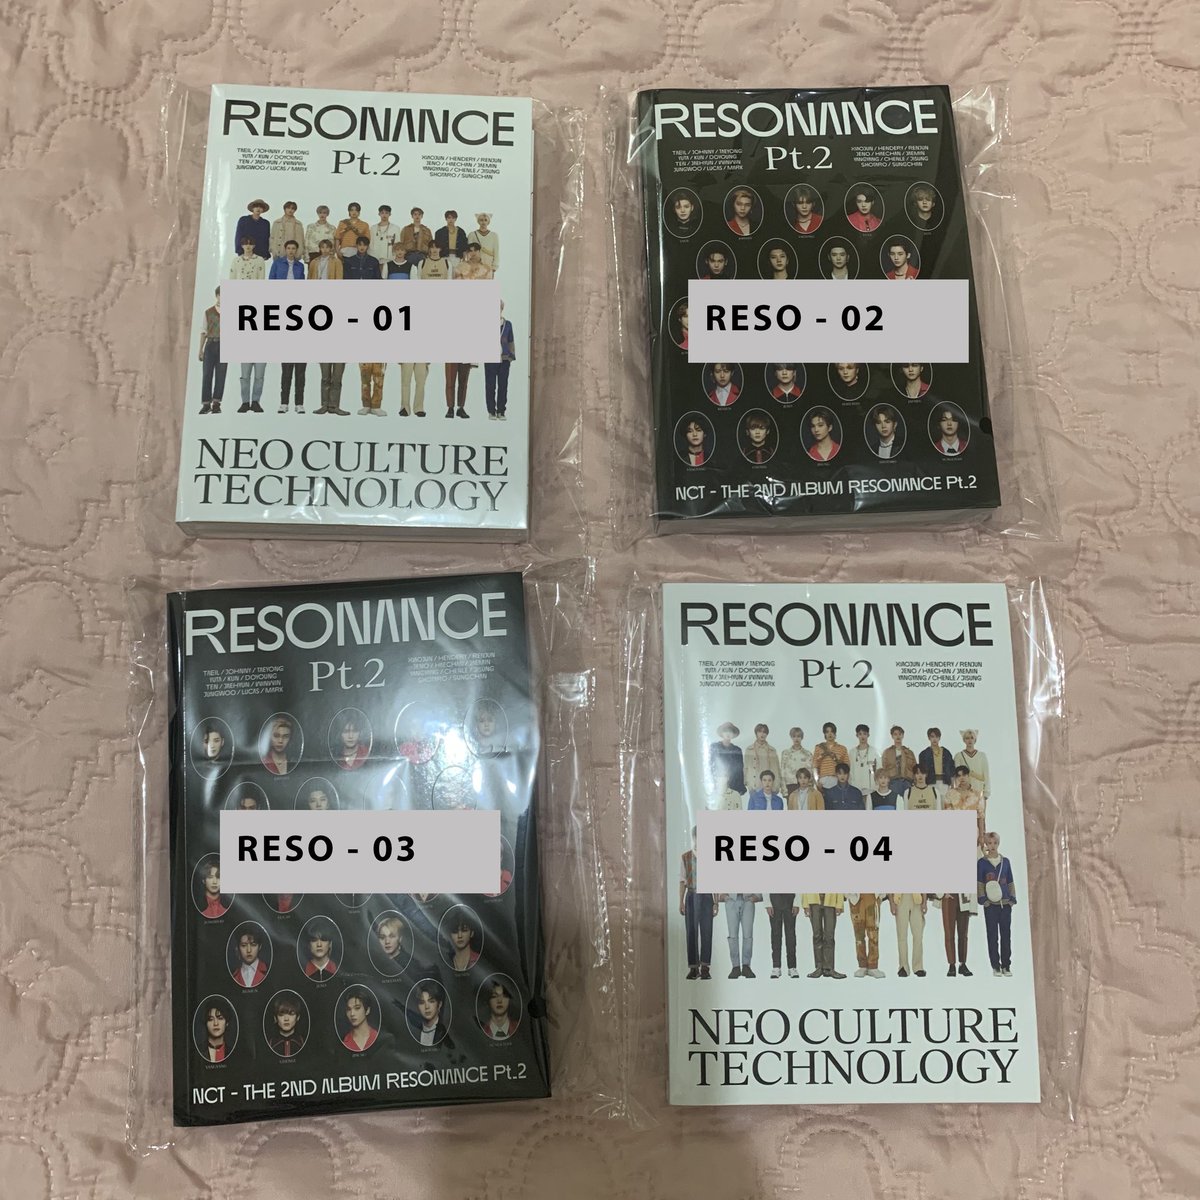 wts lfb ph on hand exo nct rv superm sf9 pc unsealed album postcard posterReply with “mine + code”, or “mine for (@/username) + code”chenle nct 2020 id card unsealed album poster resonance departure arrival